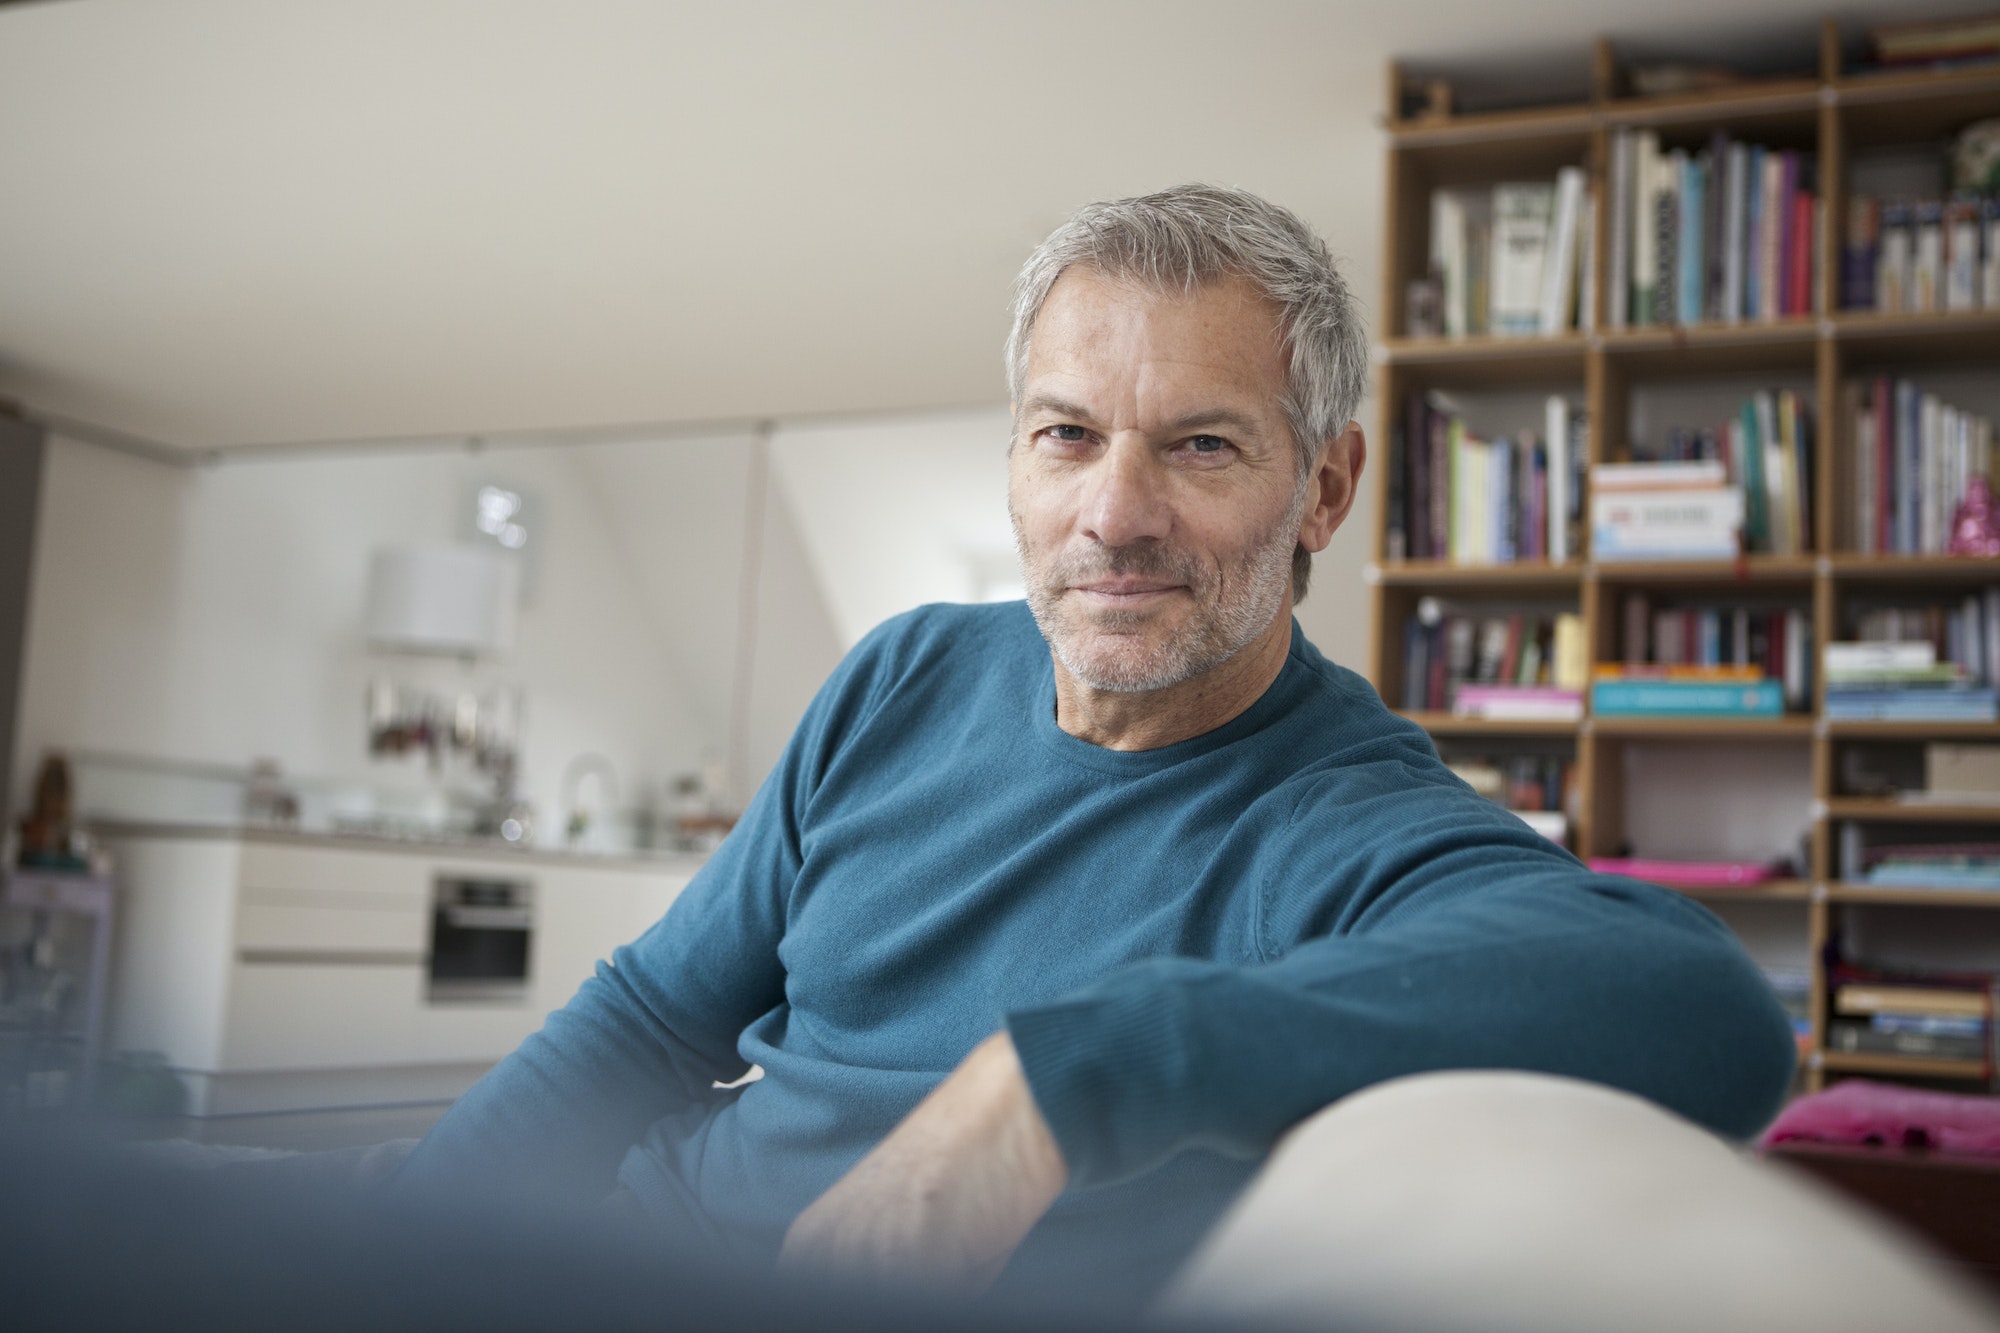 Portrait of relaxed man at home